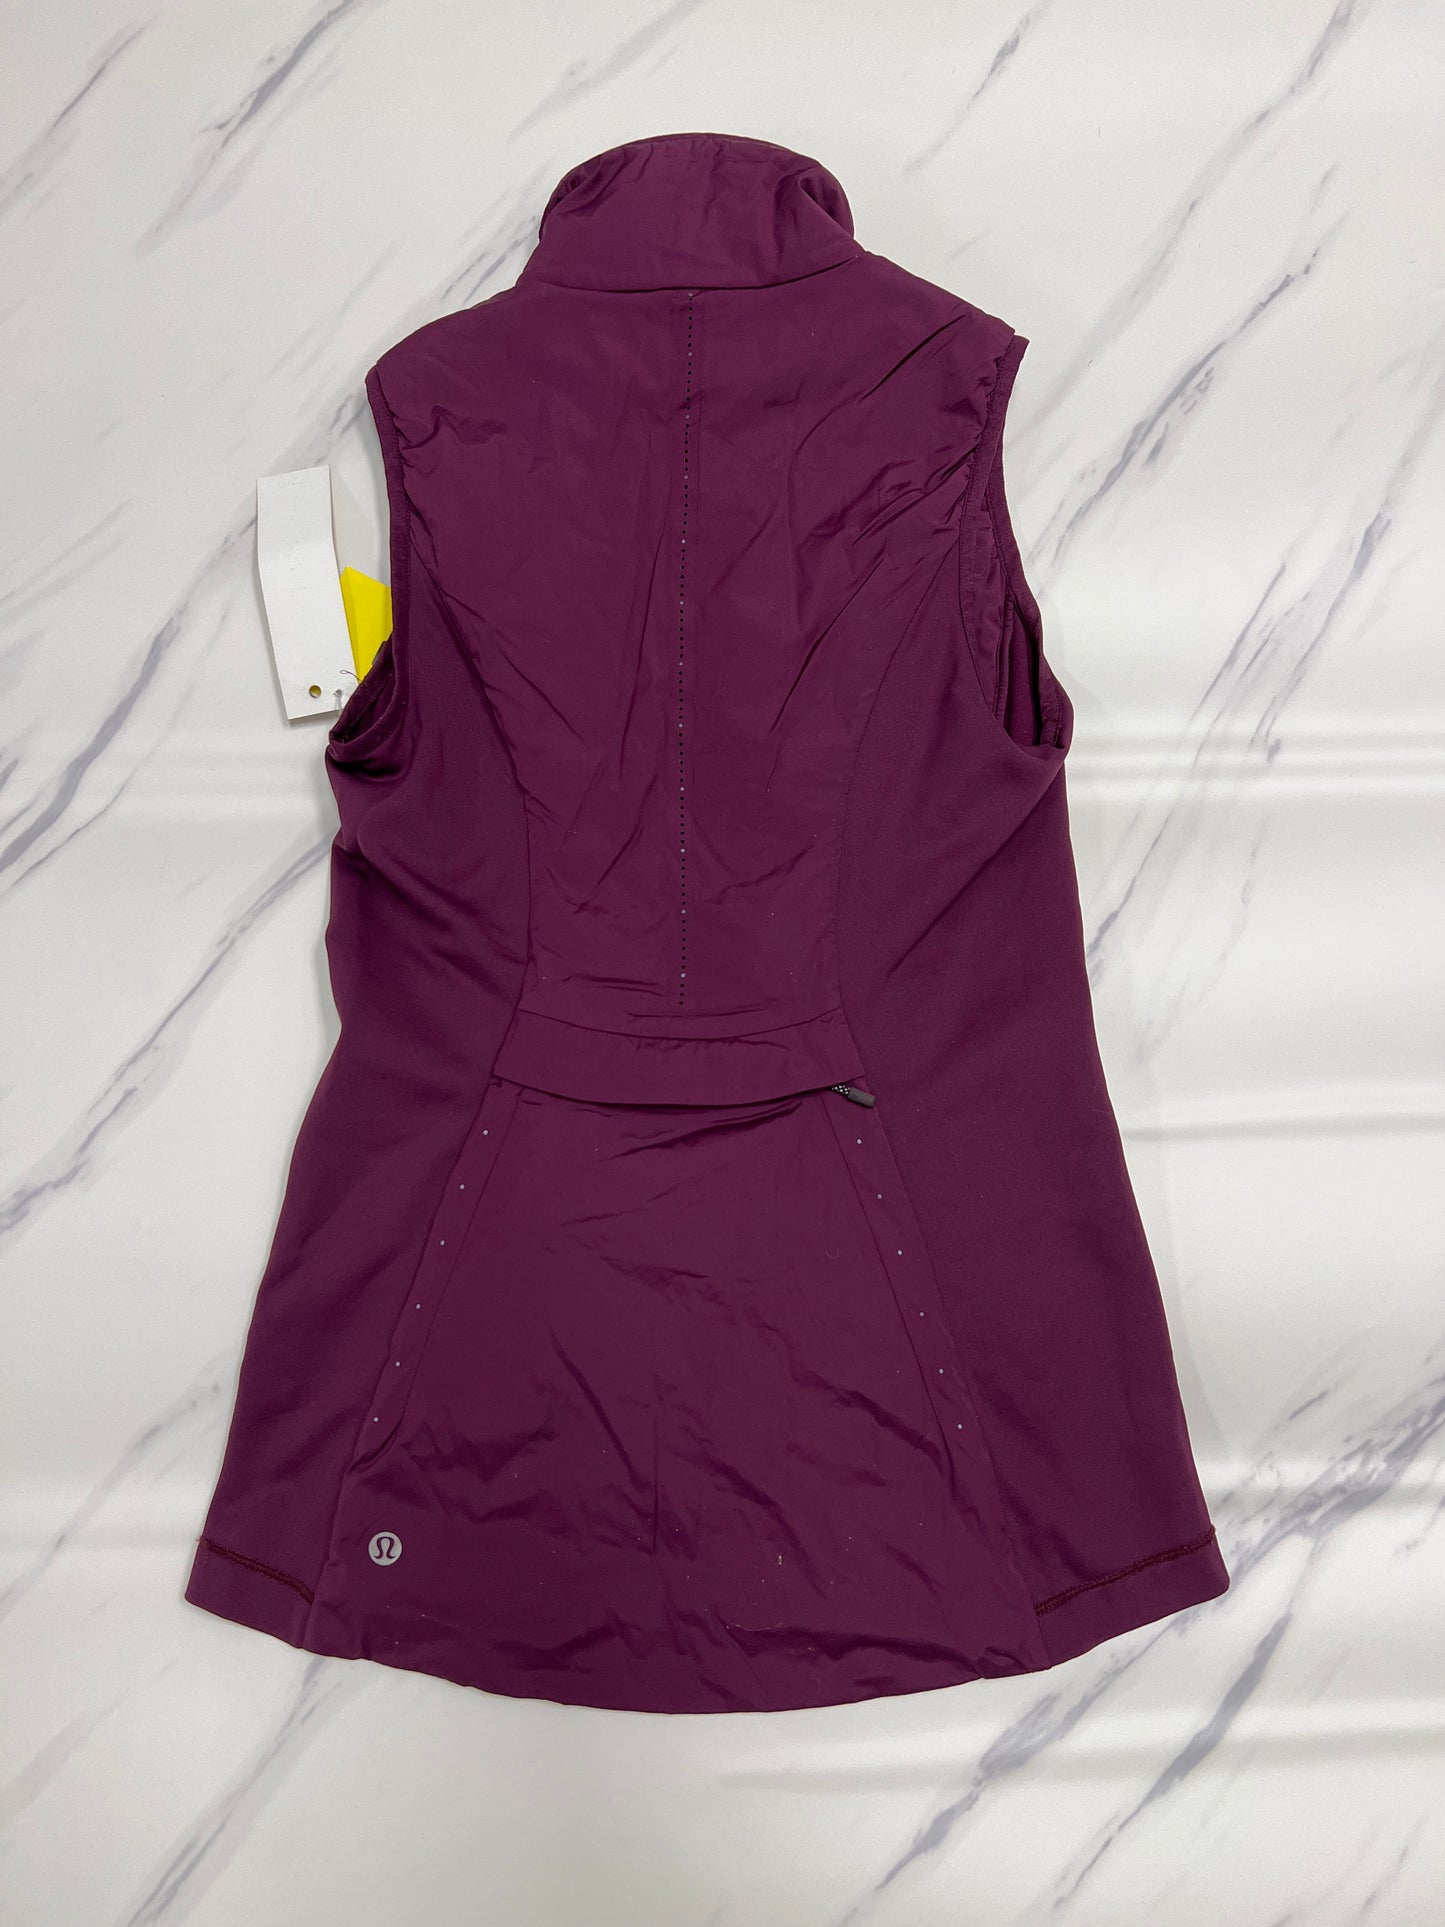 Vest Puffer & Quilted By Lululemon  Size: 2